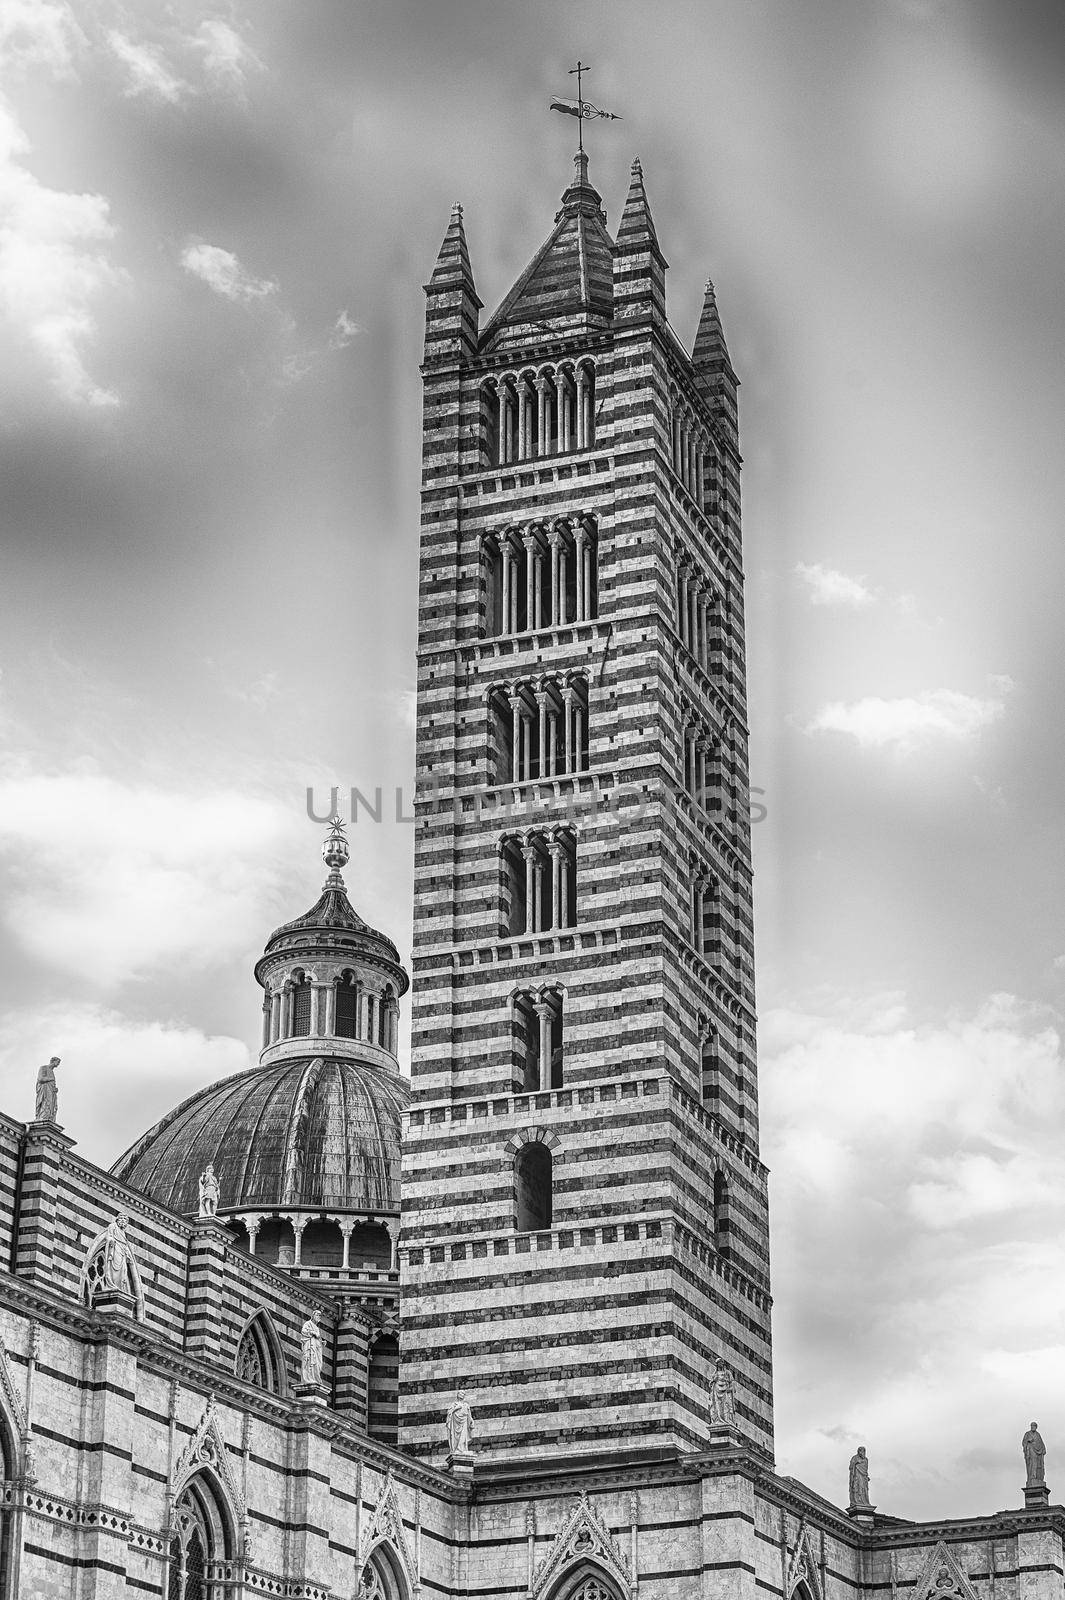 Belltower of the gothic Cathedral of Siena, Tuscany, Italy by marcorubino